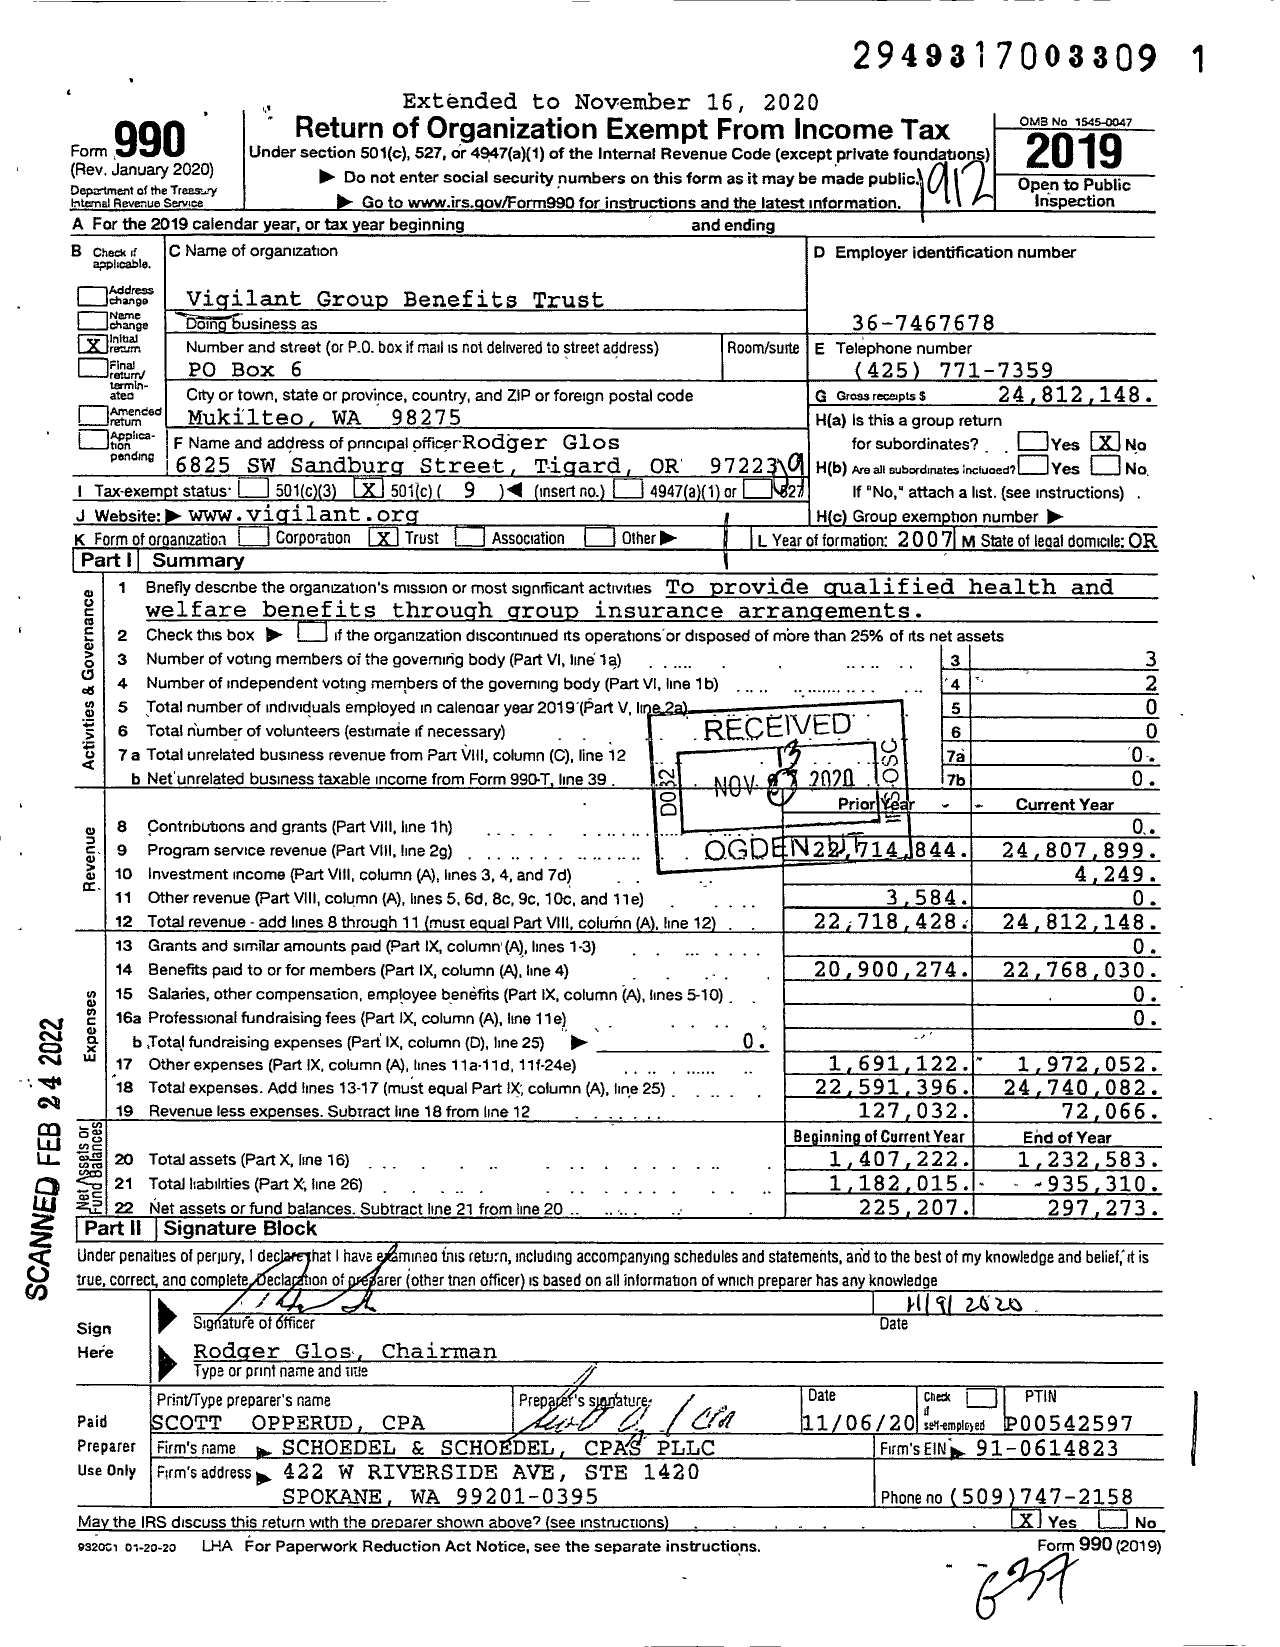 Image of first page of 2019 Form 990O for Vigilant Group Benefits Trust